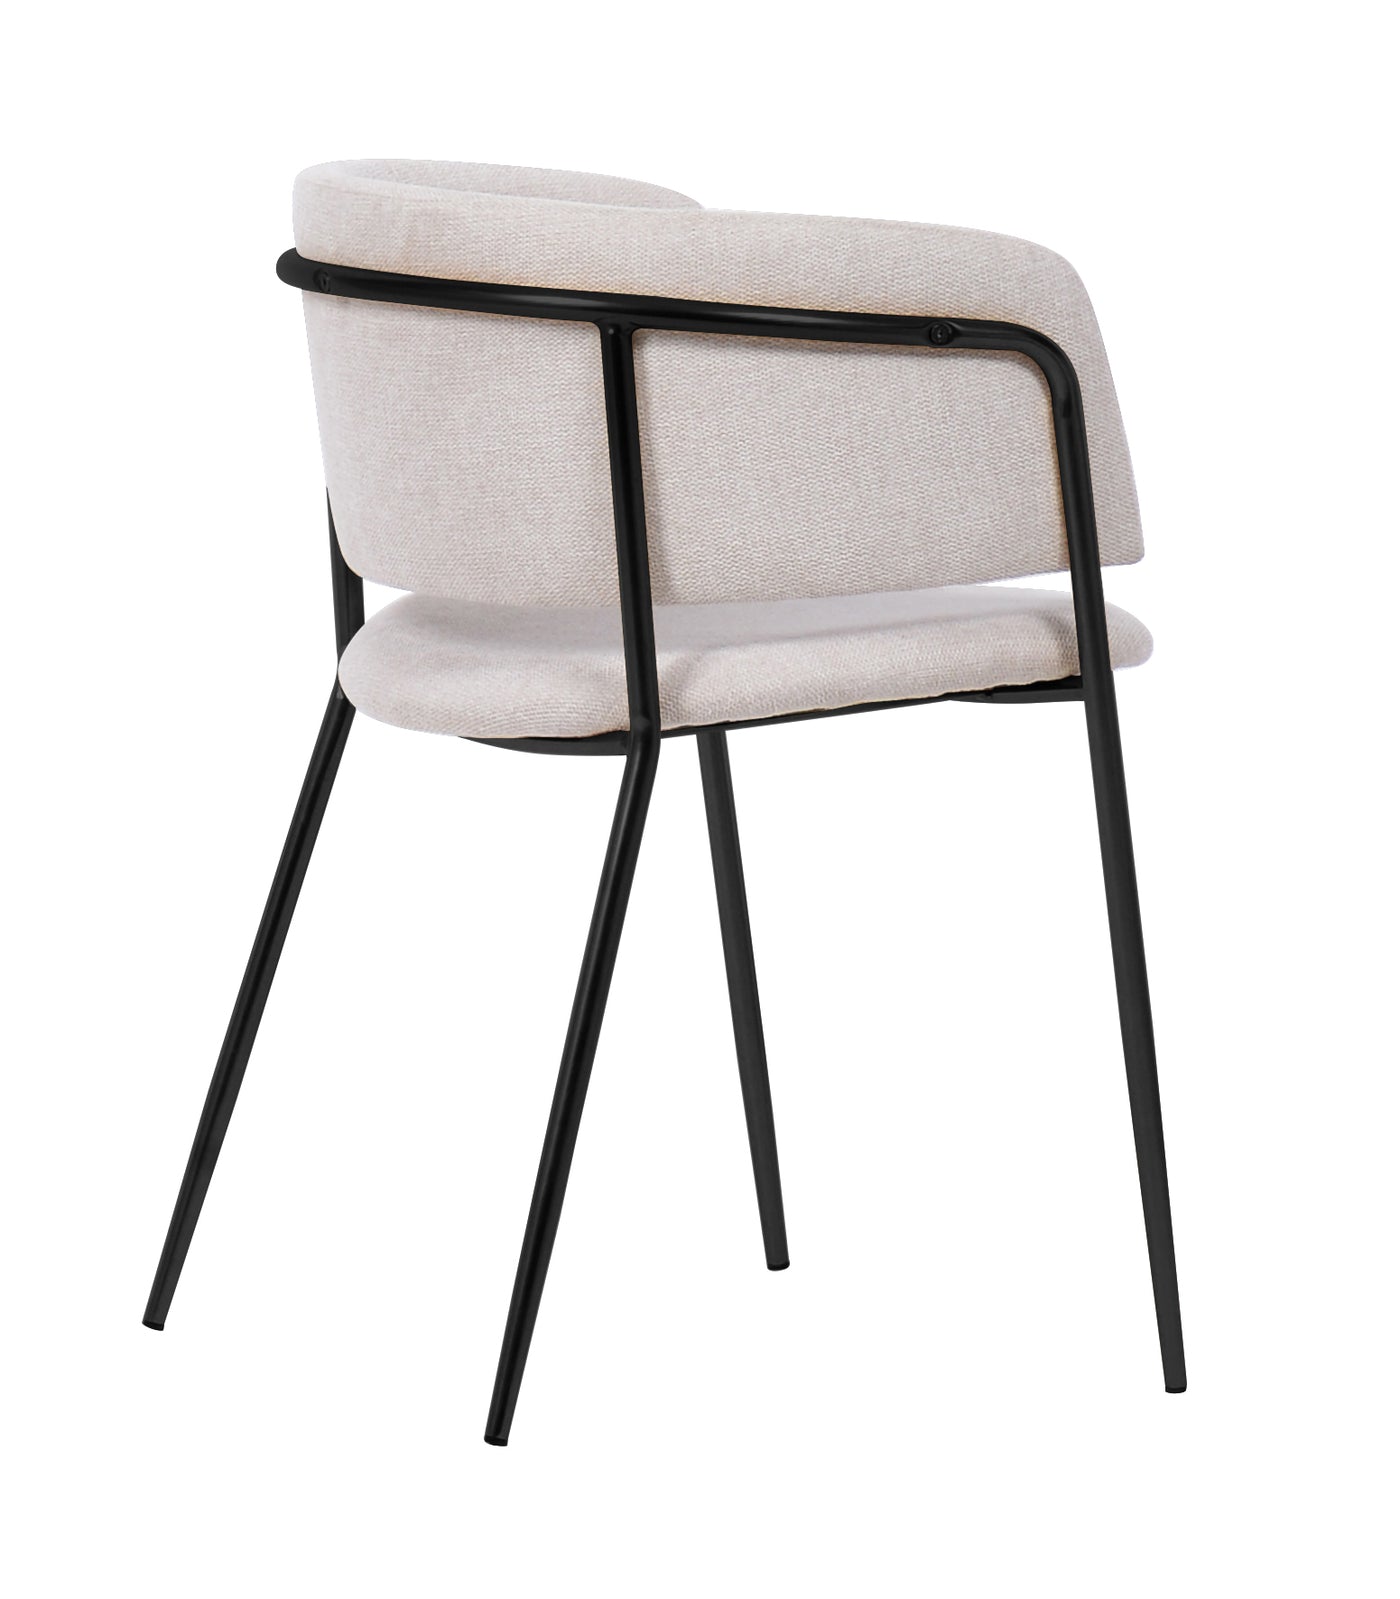 Nell Dining Chair Beige Fabric - Black Frame